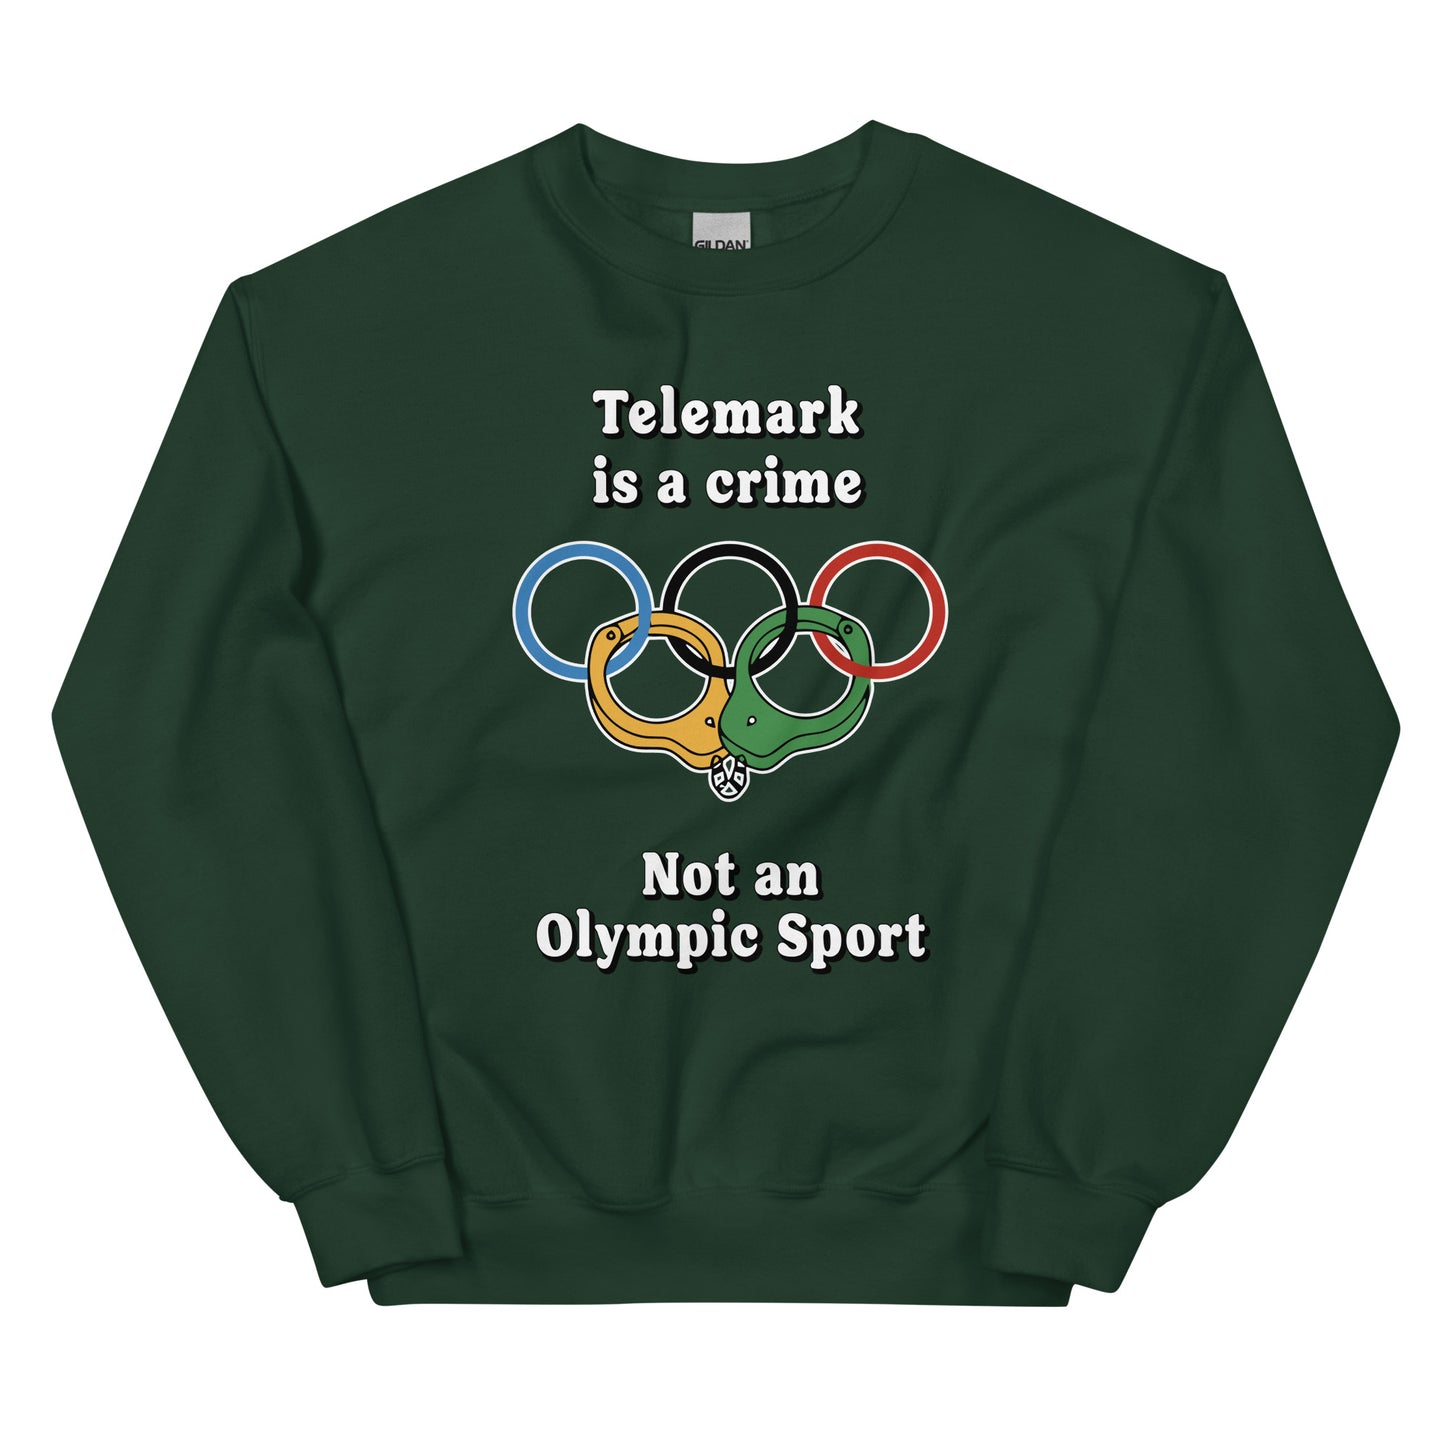 Telemark is a crime not an olympic sport design printed on a crewneck sweatshirt by Whistler Shirts